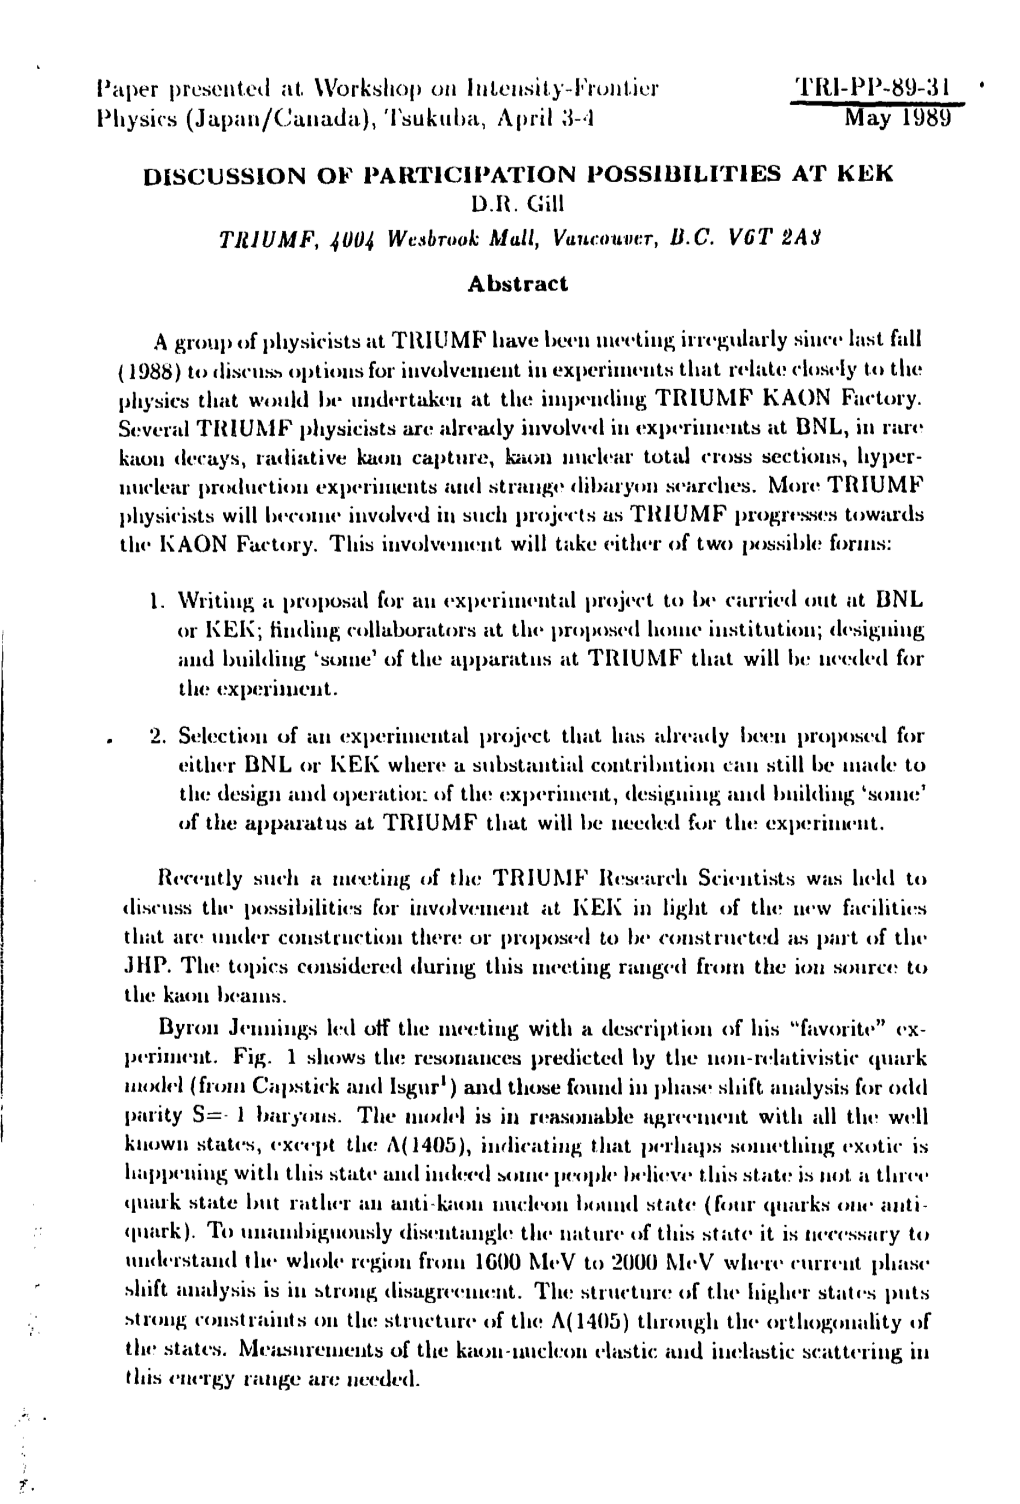 Paper Presented At. Workshop on Iiilensuy-Fioiilier TRI-PP-89-31 Physics (Japan/Canada), Tsukuba, April ,V1 May 1989